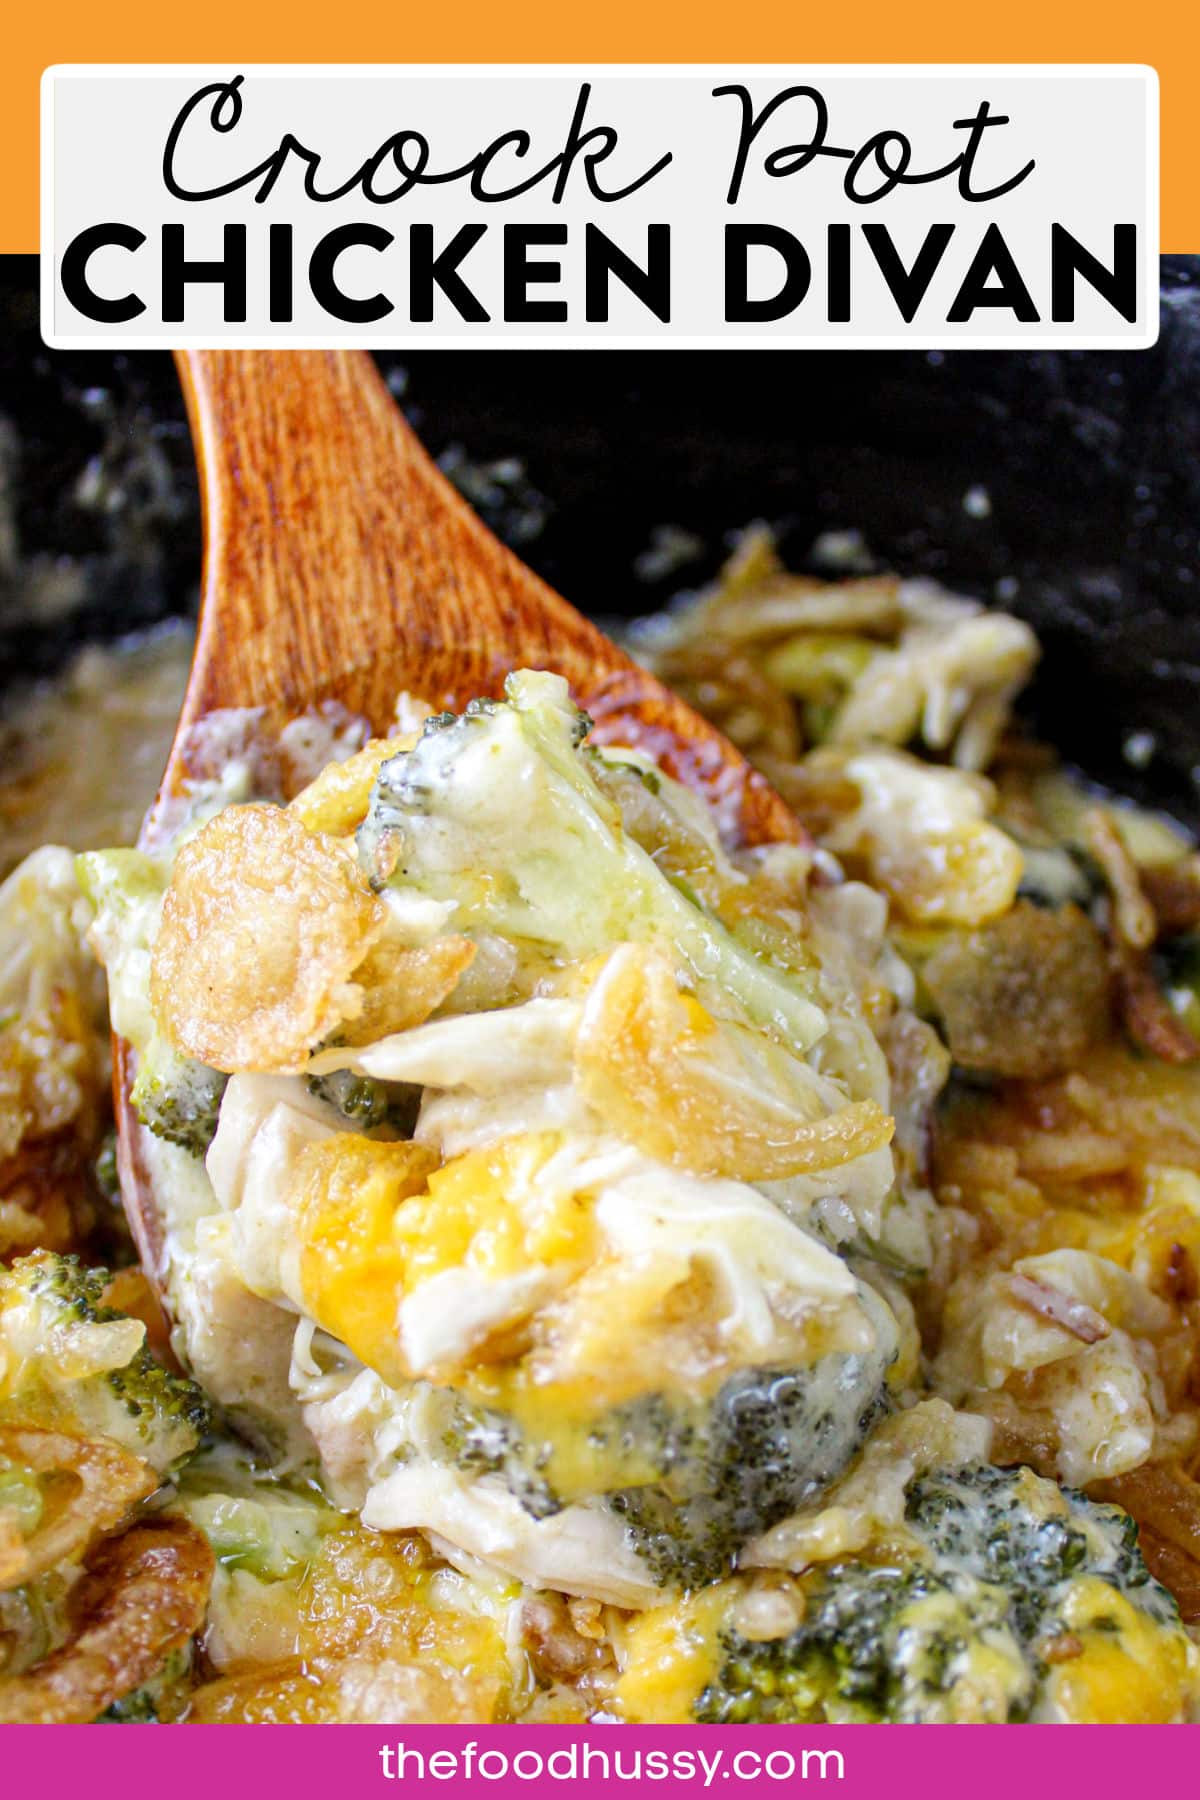 Chicken Divan in the Slow Cooker is a delicious comfort food casserole! Shredded chicken breast coated in a creamy gravy and topped with broccoli, cheese and a little crunch! This dish is the taste of home.  via @foodhussy